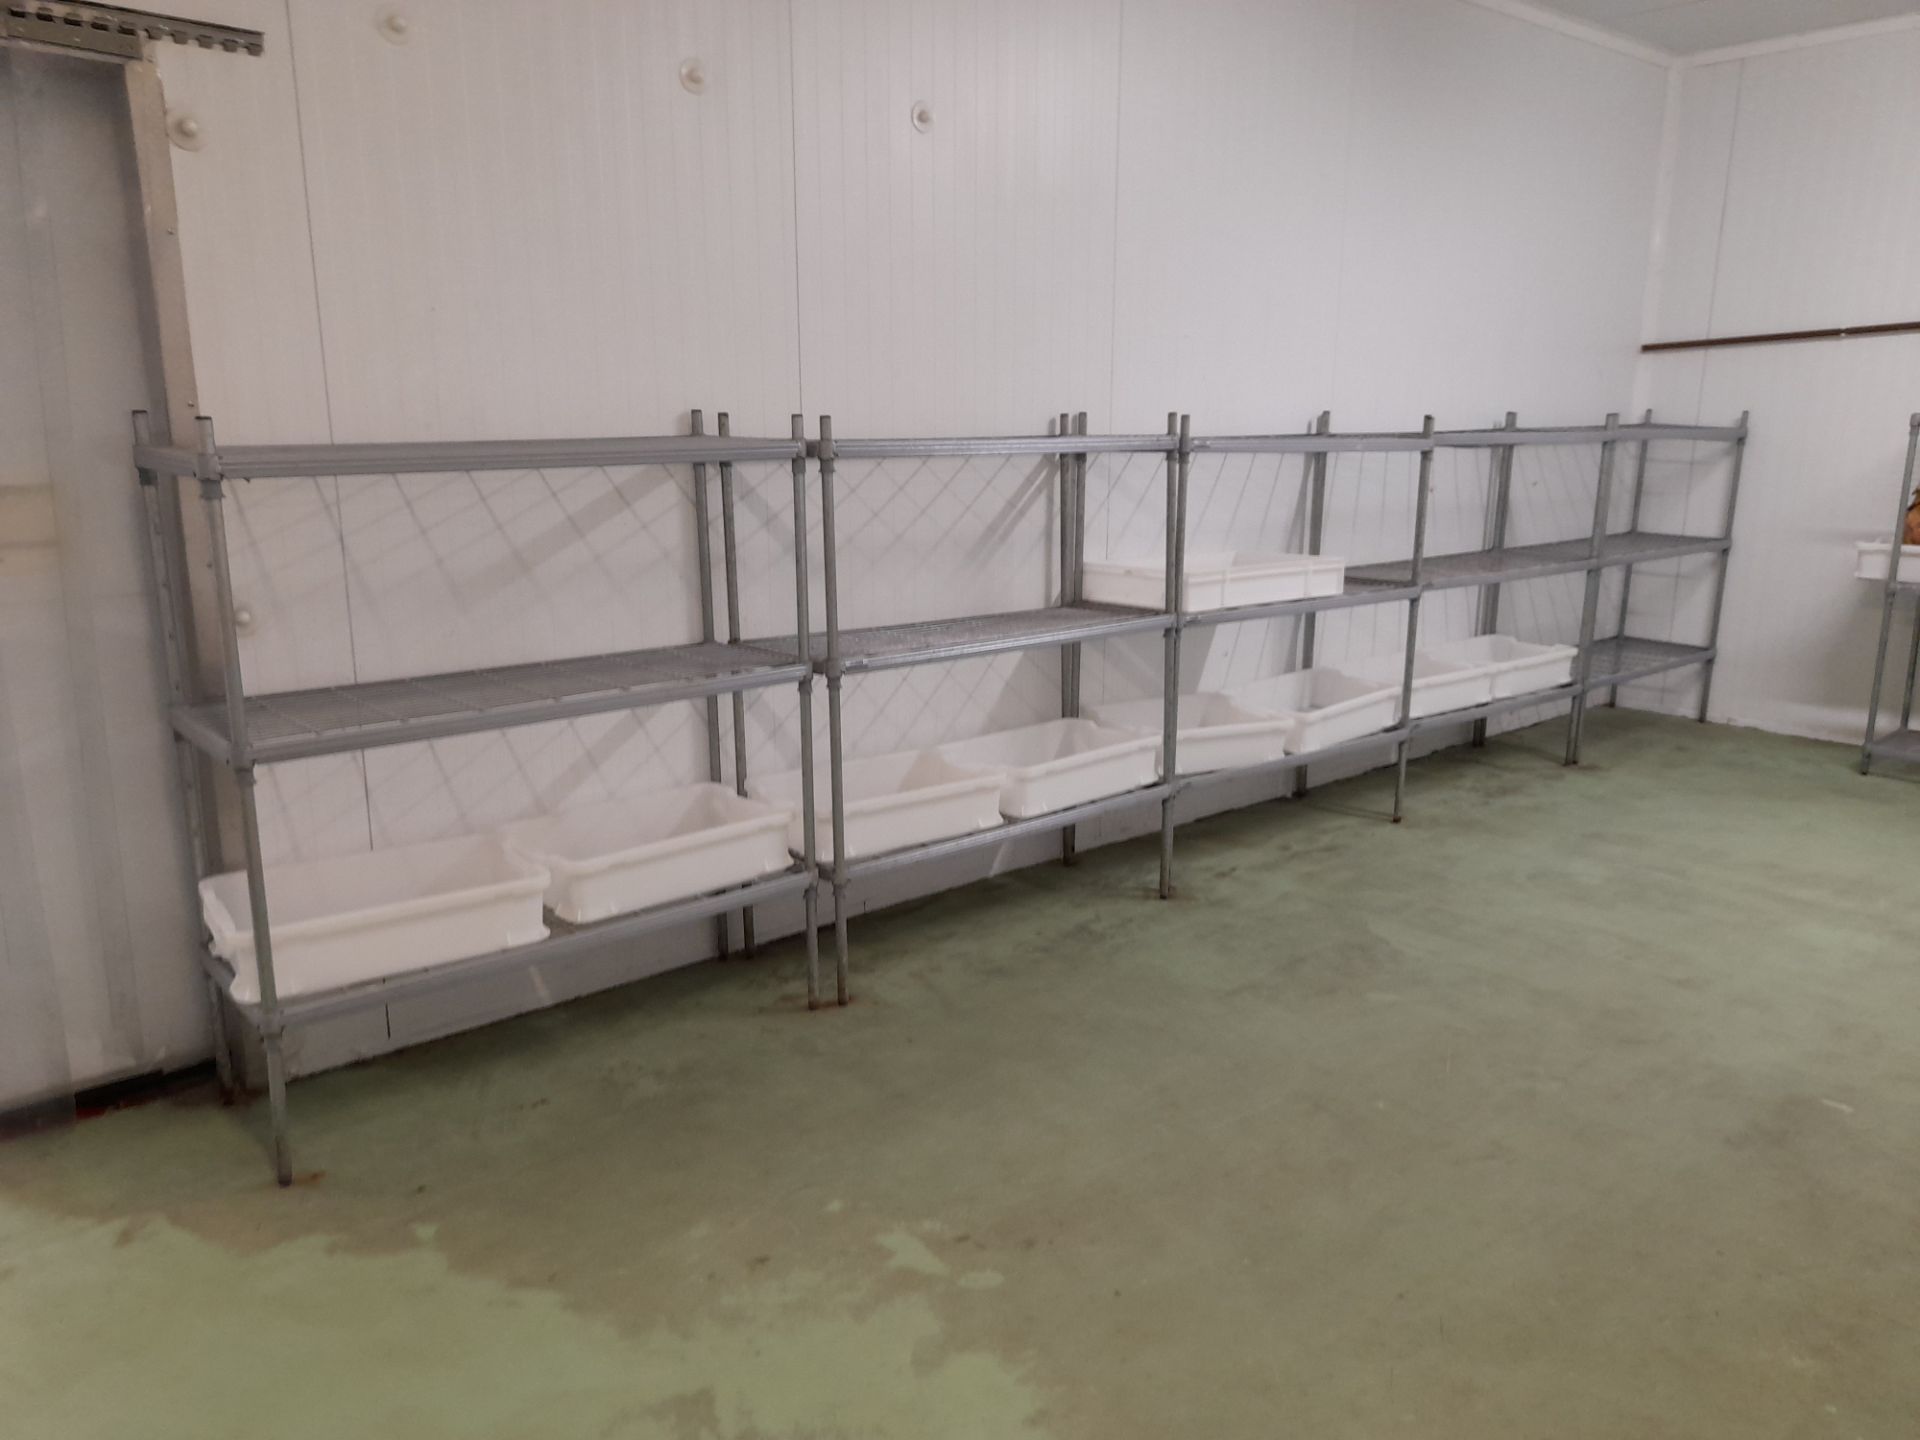 8 x stainless steel mesh racks 1300mm x 1050mm (located chill room 2) (only available for removal - Image 2 of 2